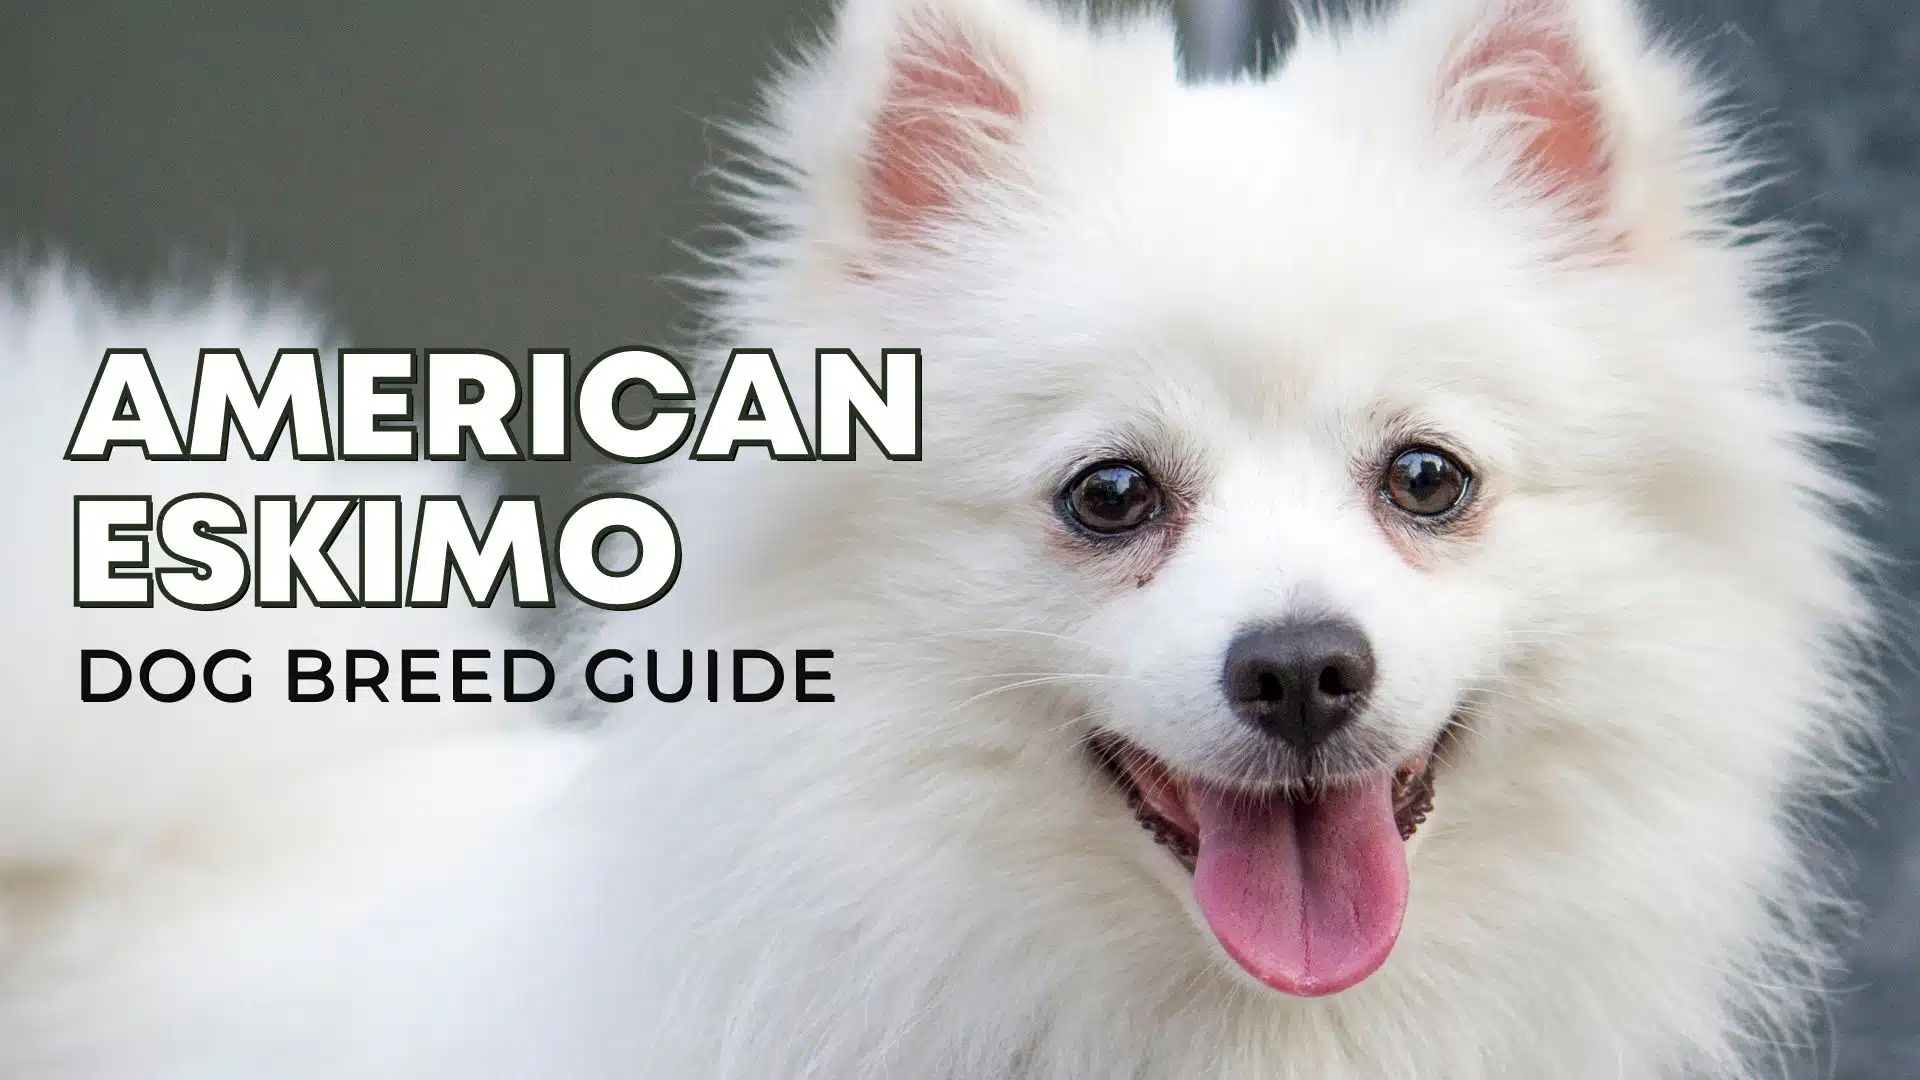 American Eskimo Dog Breed Guide: Facts, Health and Care